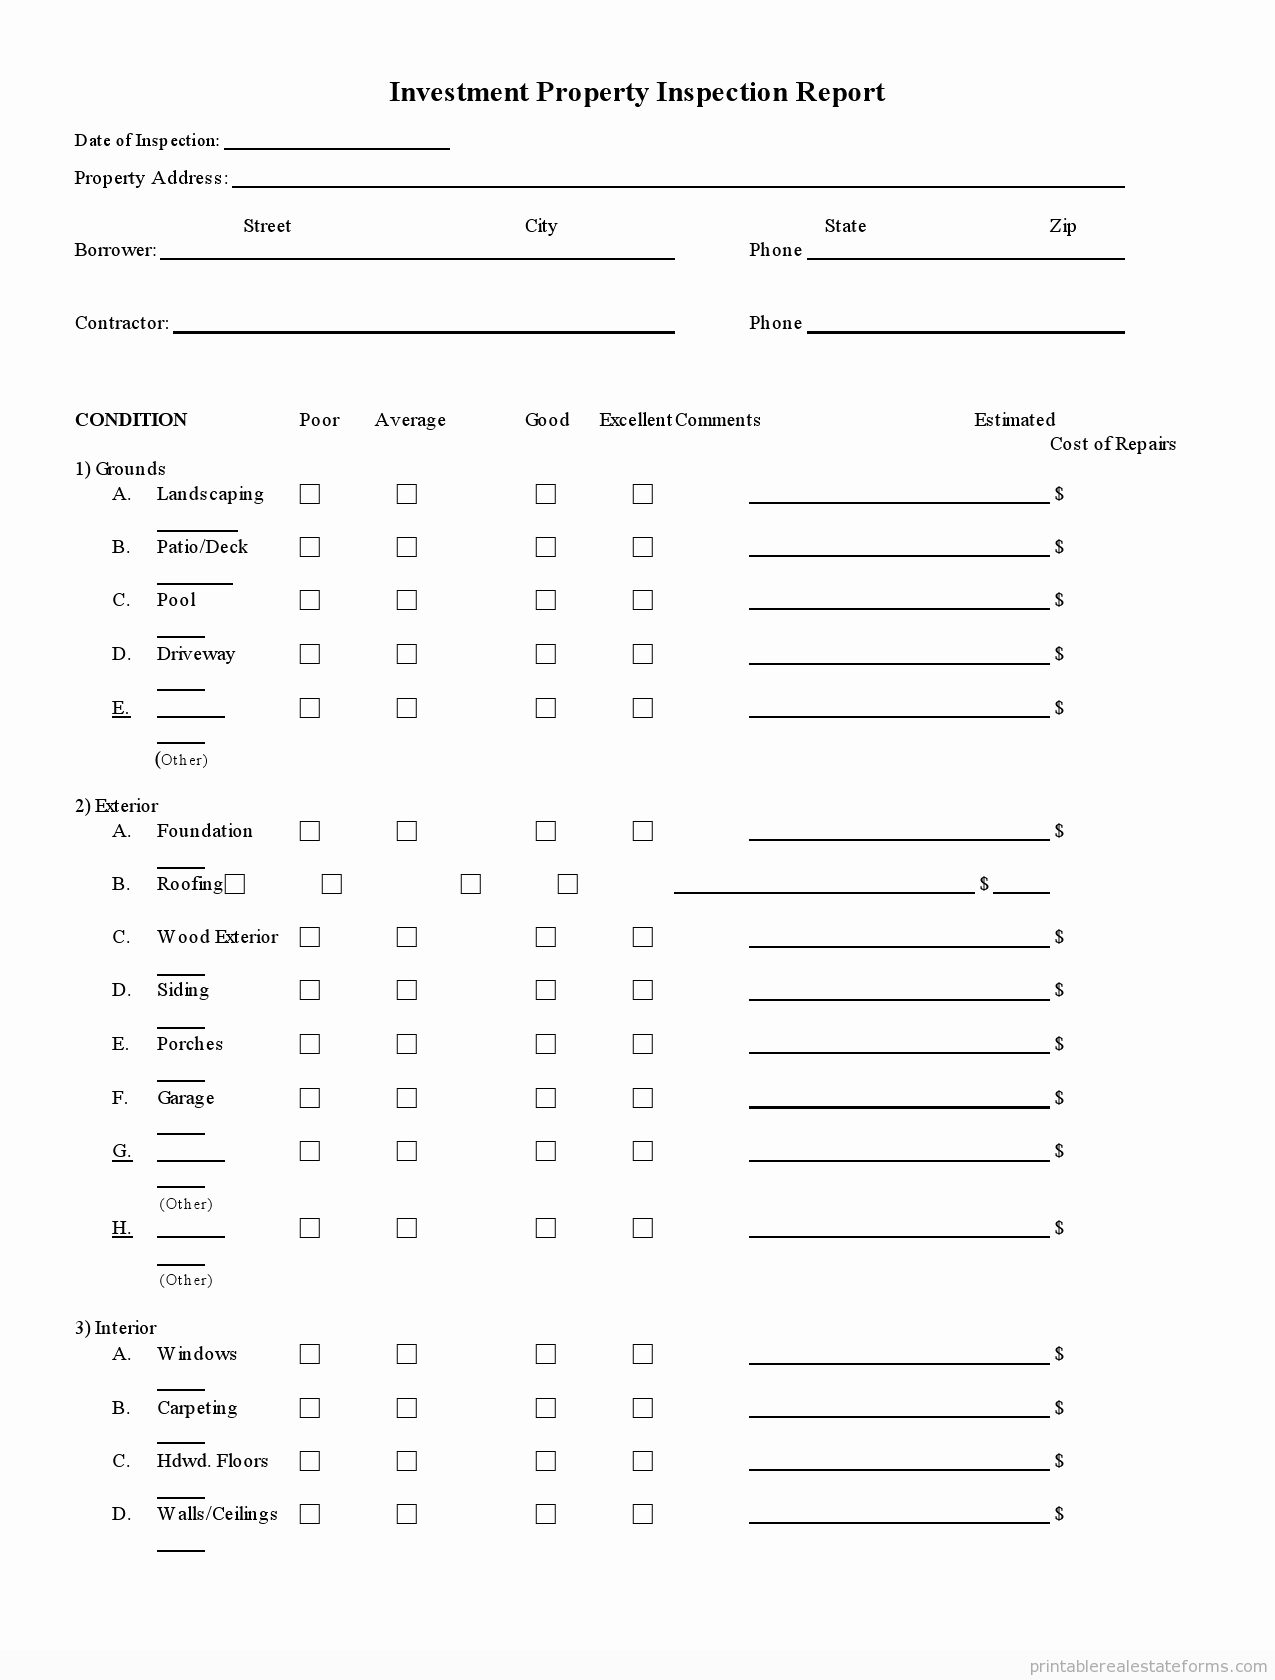 Commercial Property Inspection Checklist Template Luxury Free Printable Investment Property Inspection Report